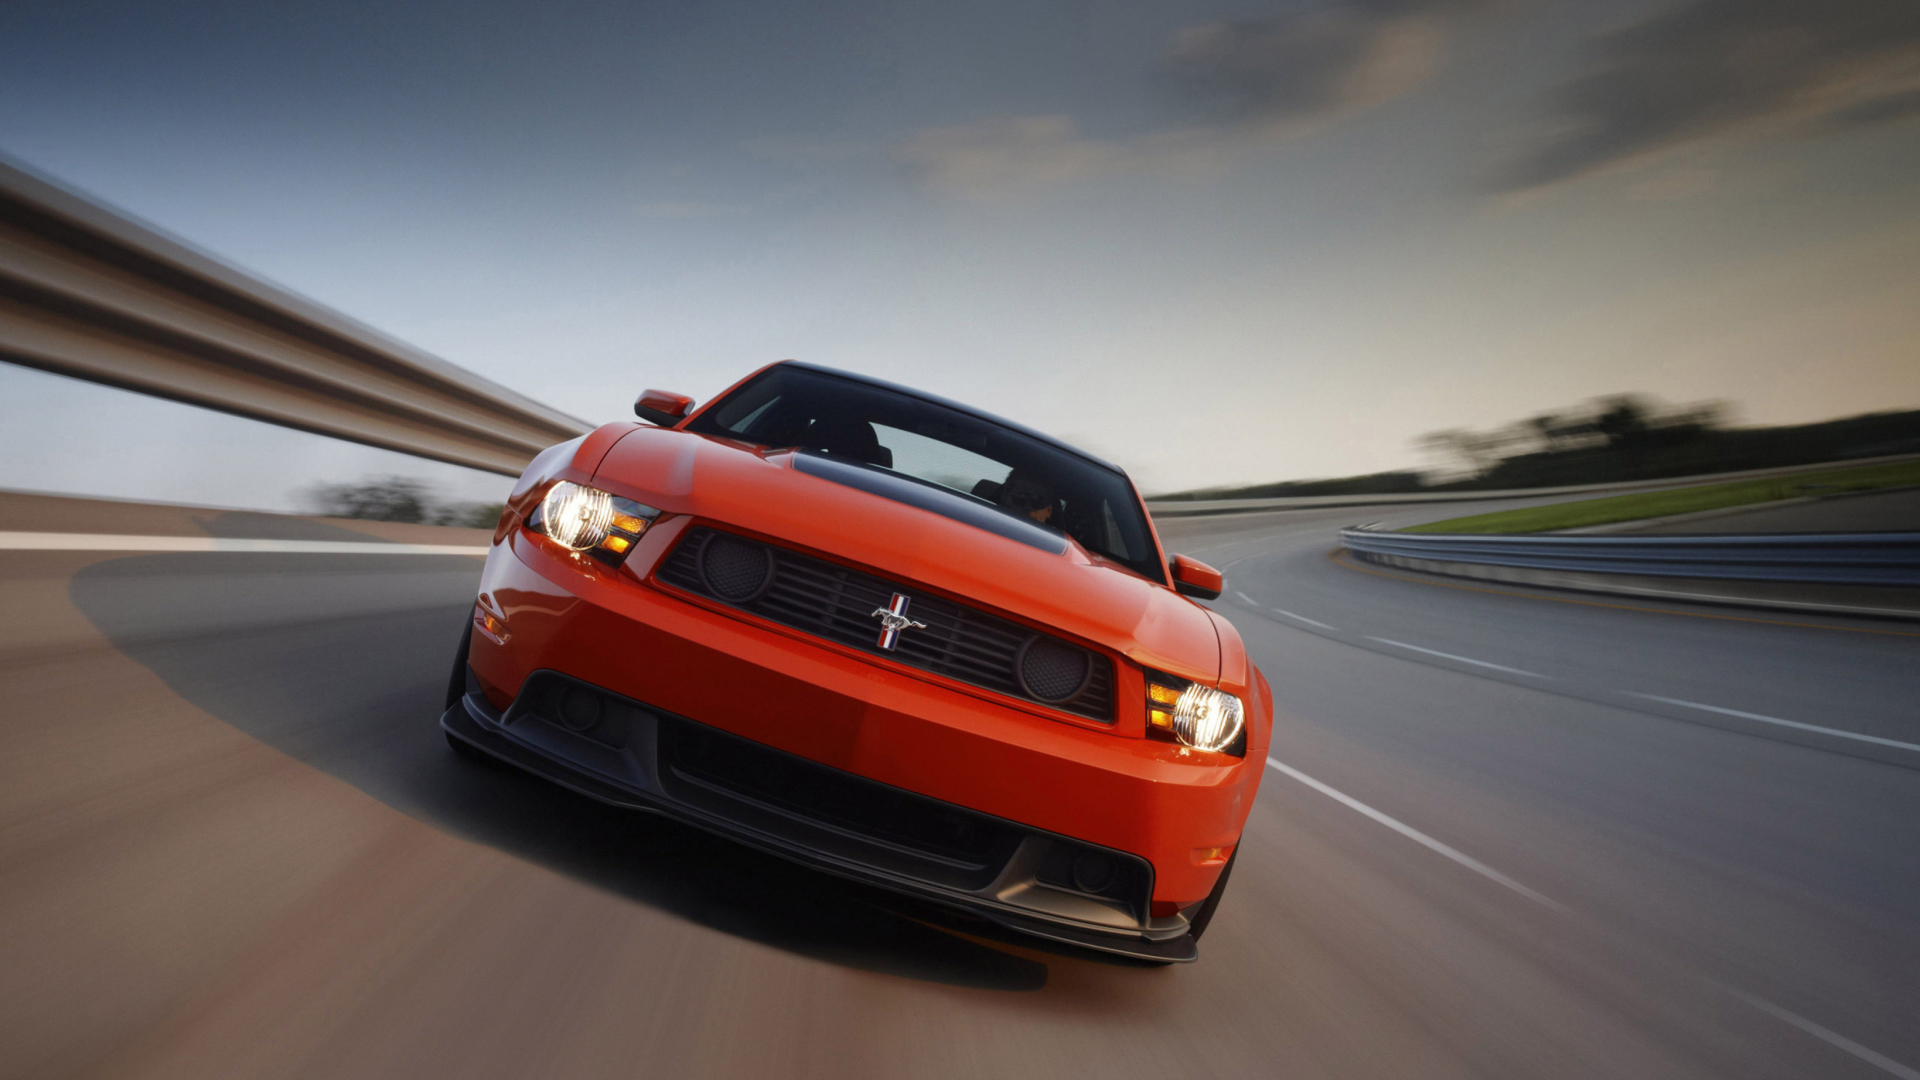 Red Cars Ford Mustang wallpaper 1920x1080